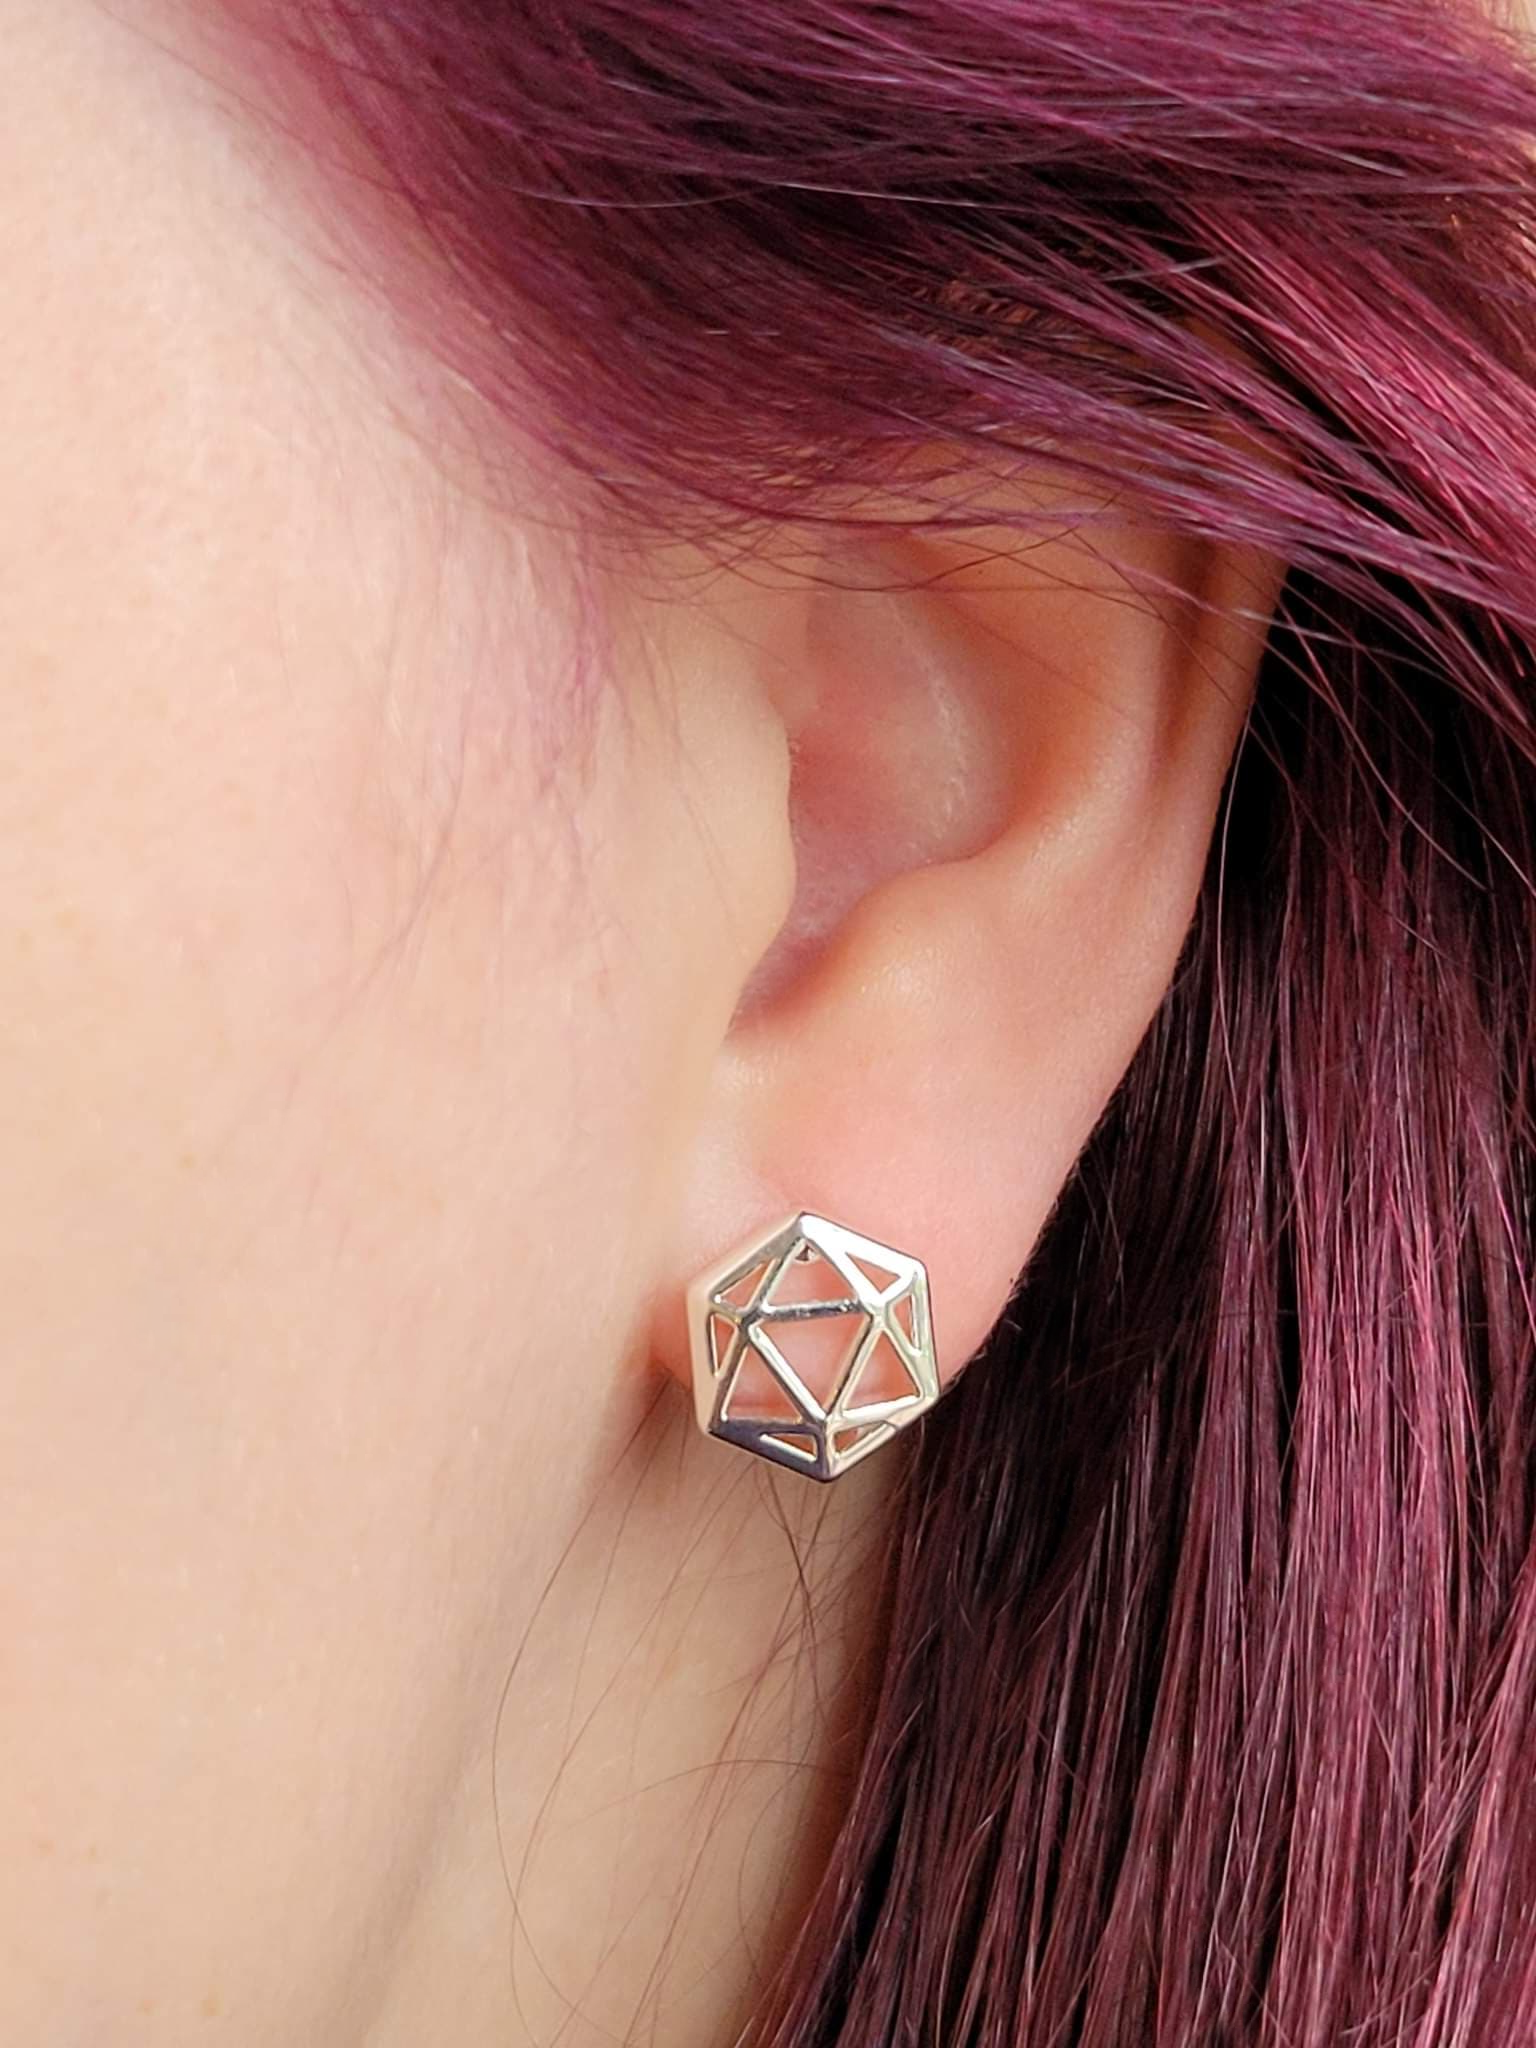 D20 Dice stud earrings silver - The Wizard's Vault